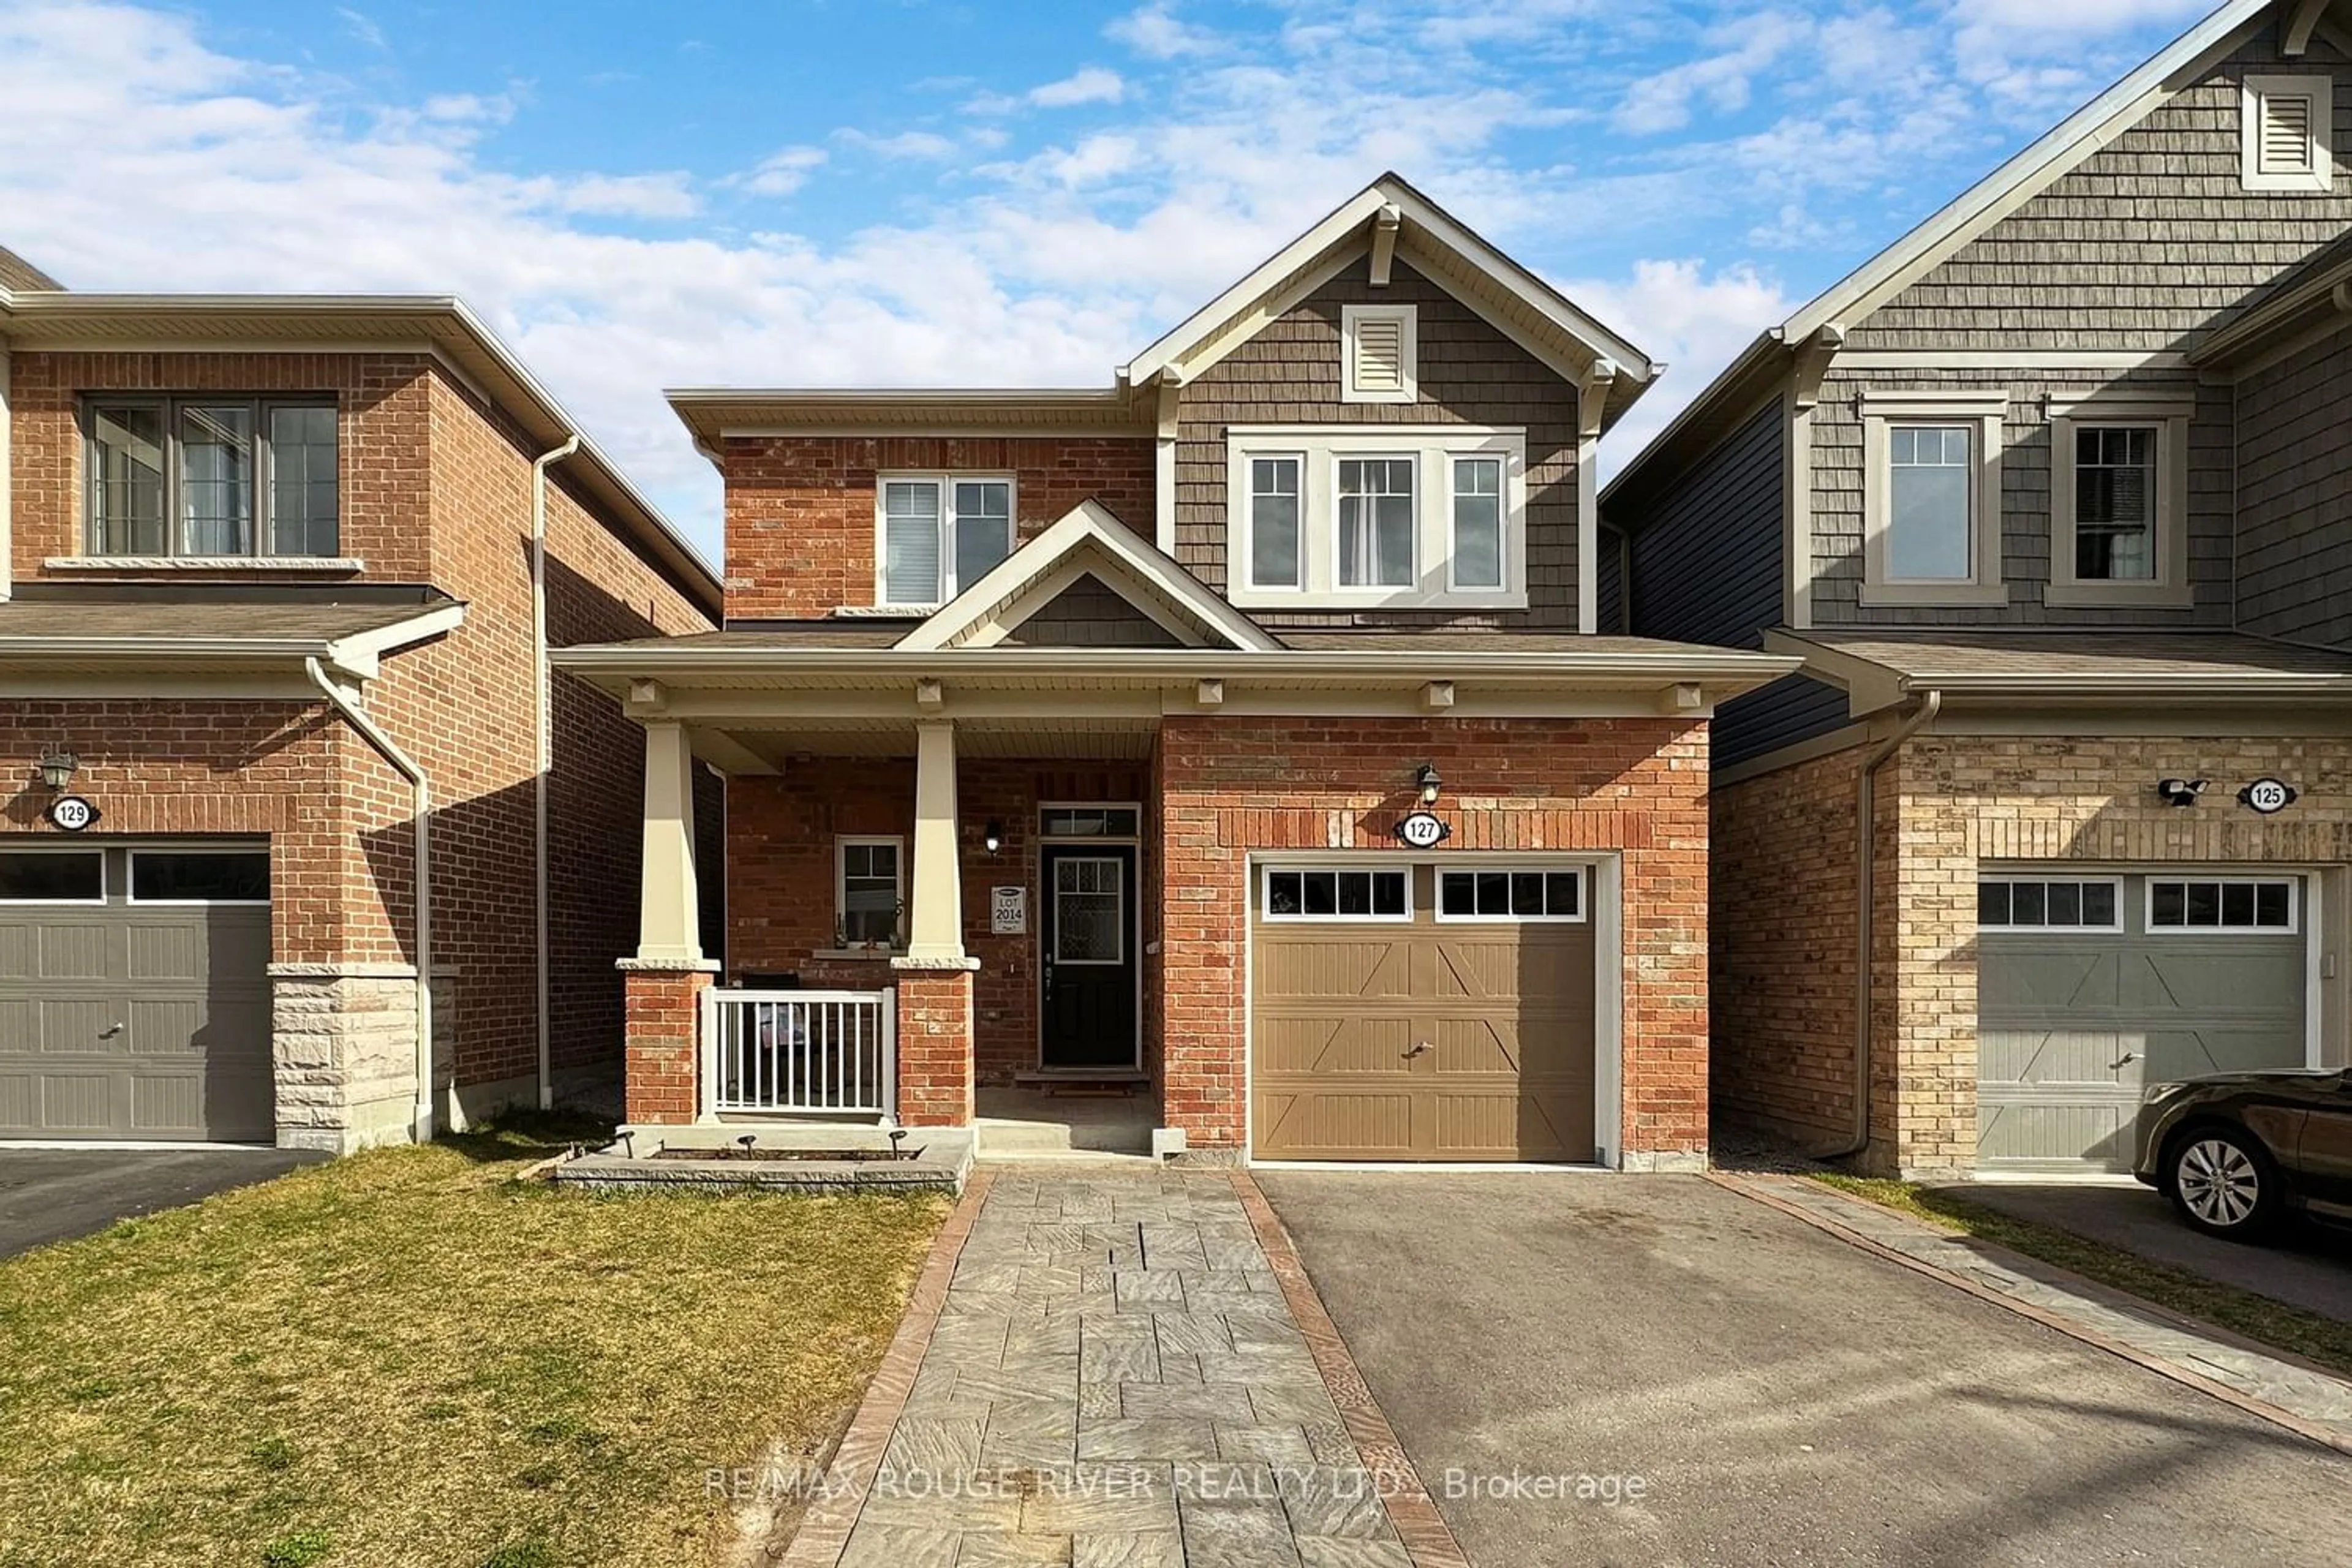 Home with brick exterior material for 127 Westfield Dr, Whitby Ontario L1P 0G1